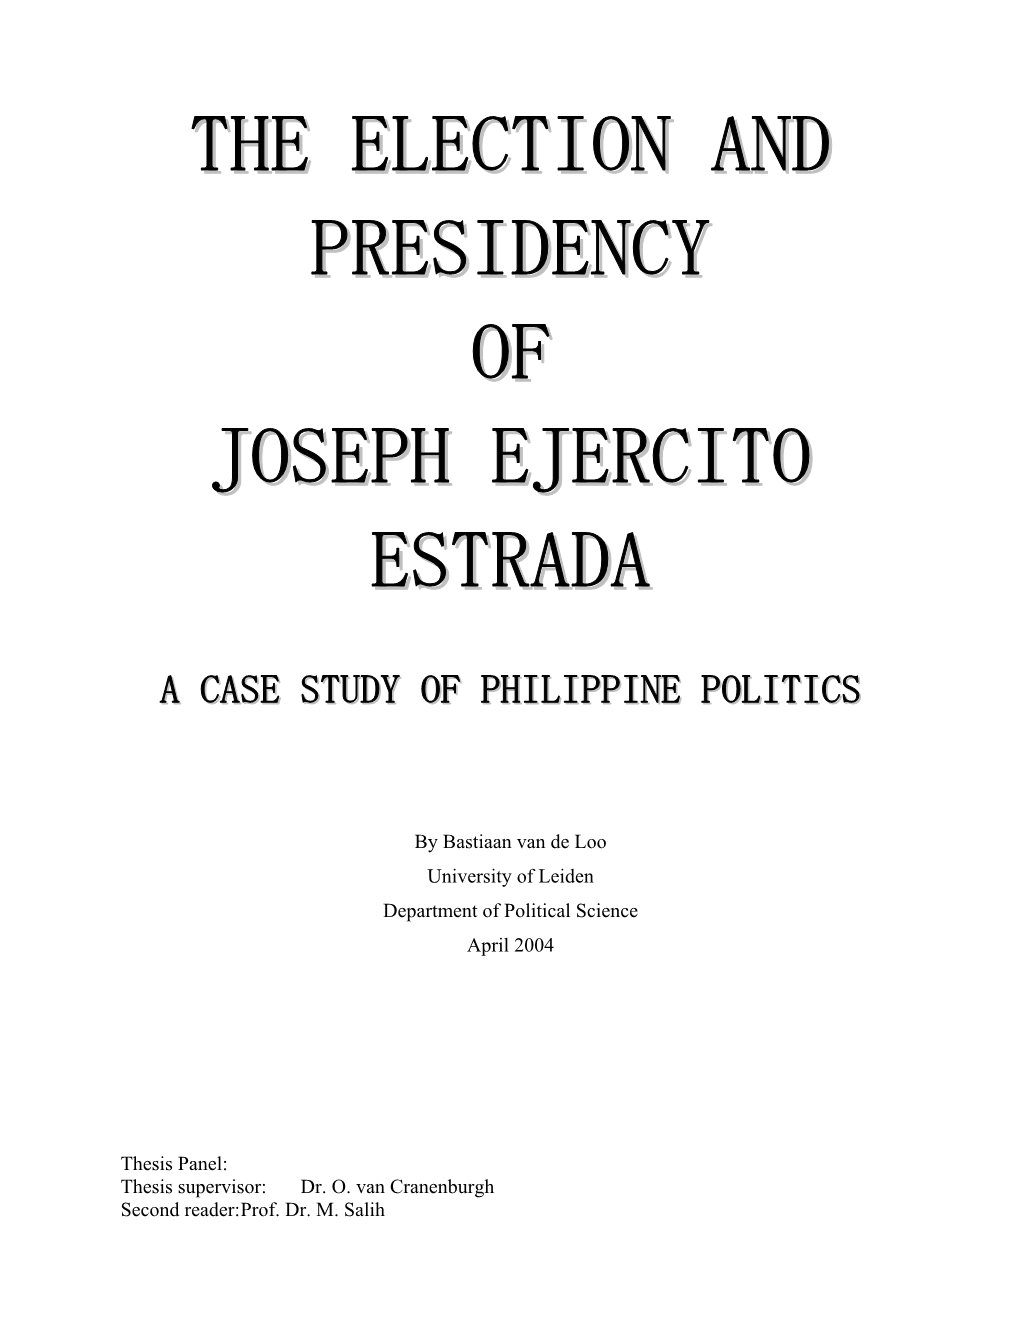 The Election and Presidency of Joseph Ejercito Estrada